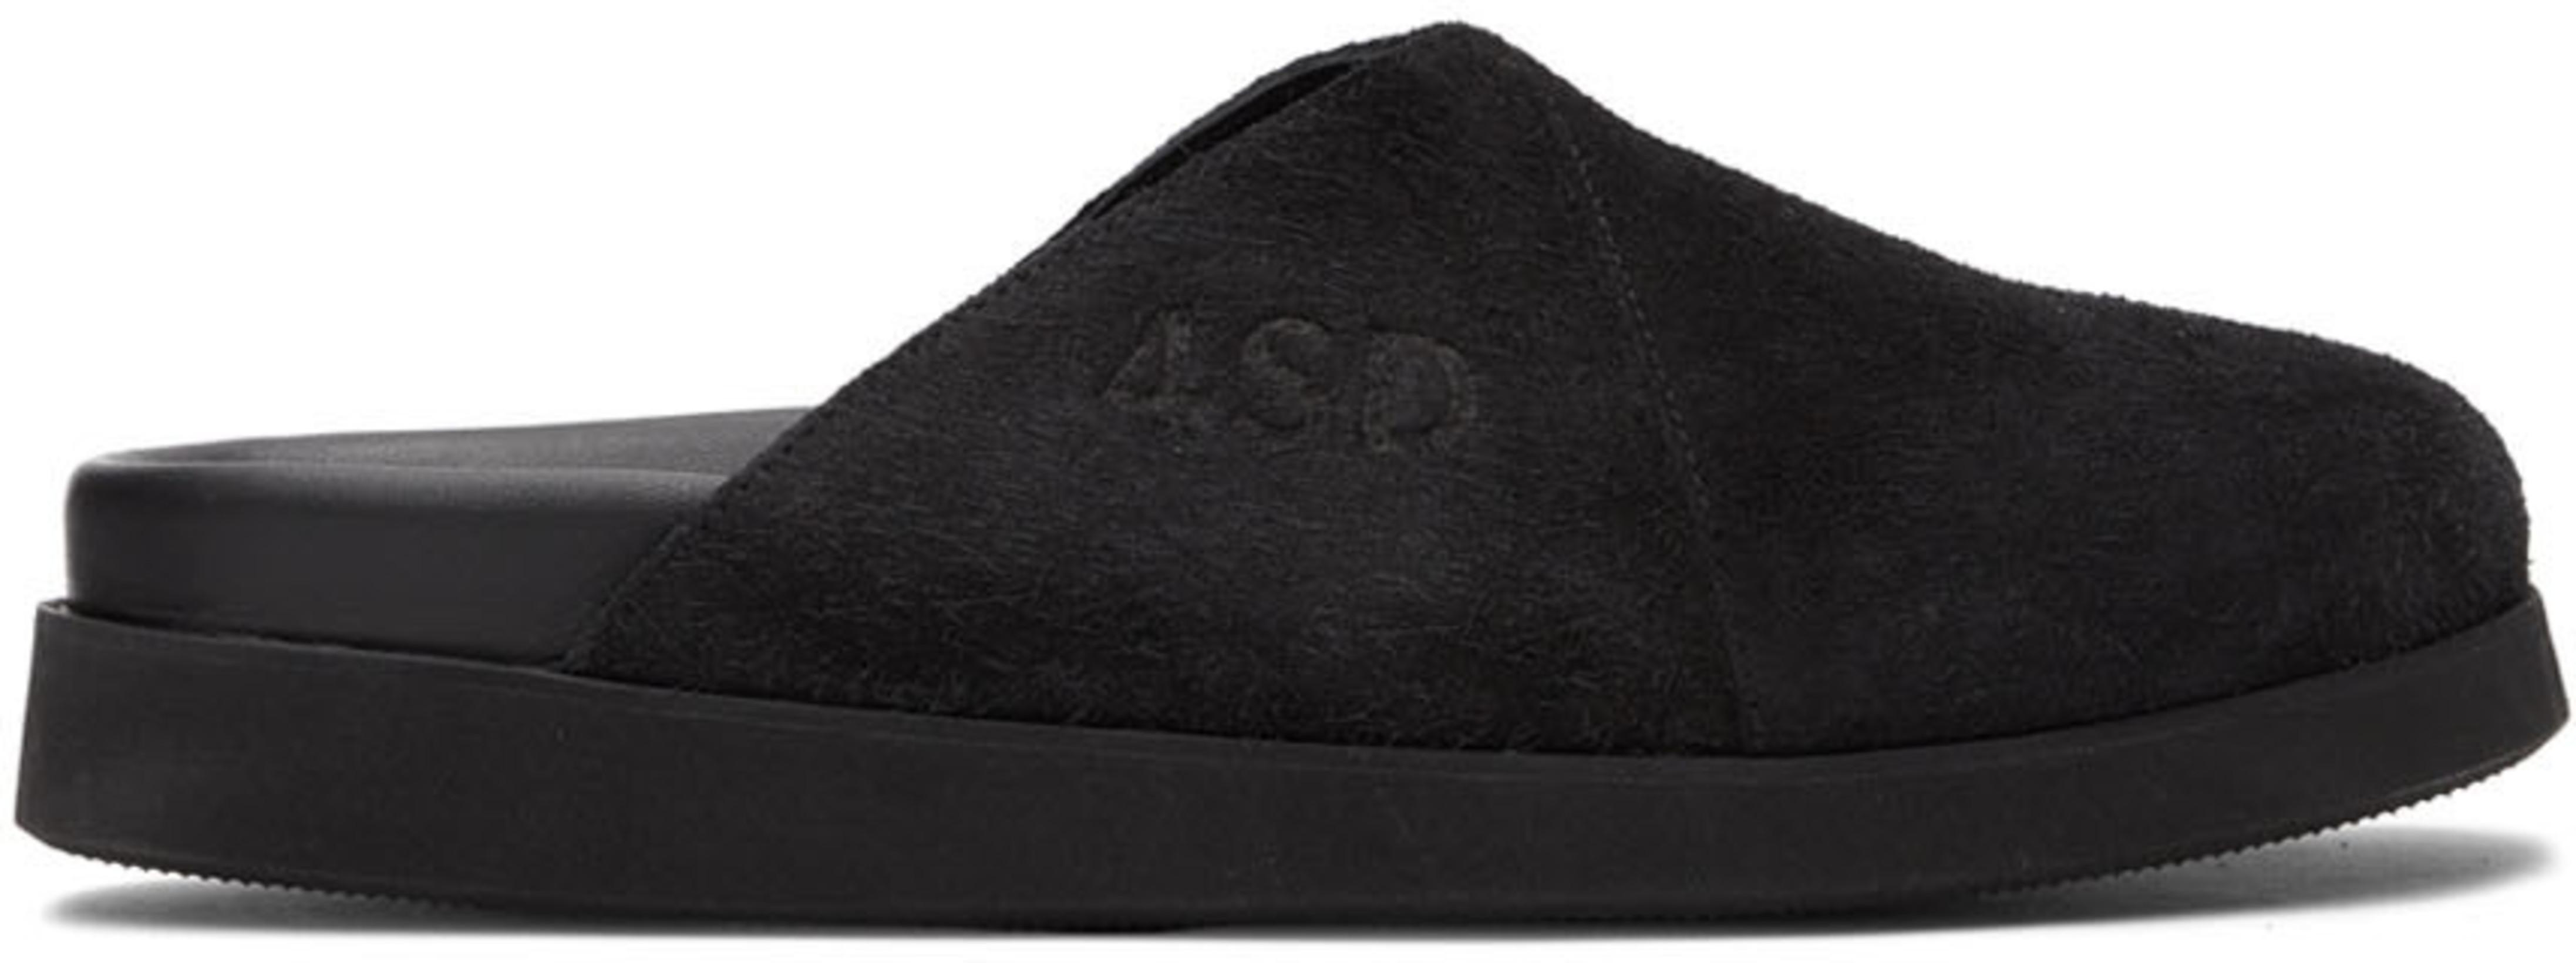 Black Suede Sabot Loafers by 4SDESIGNS